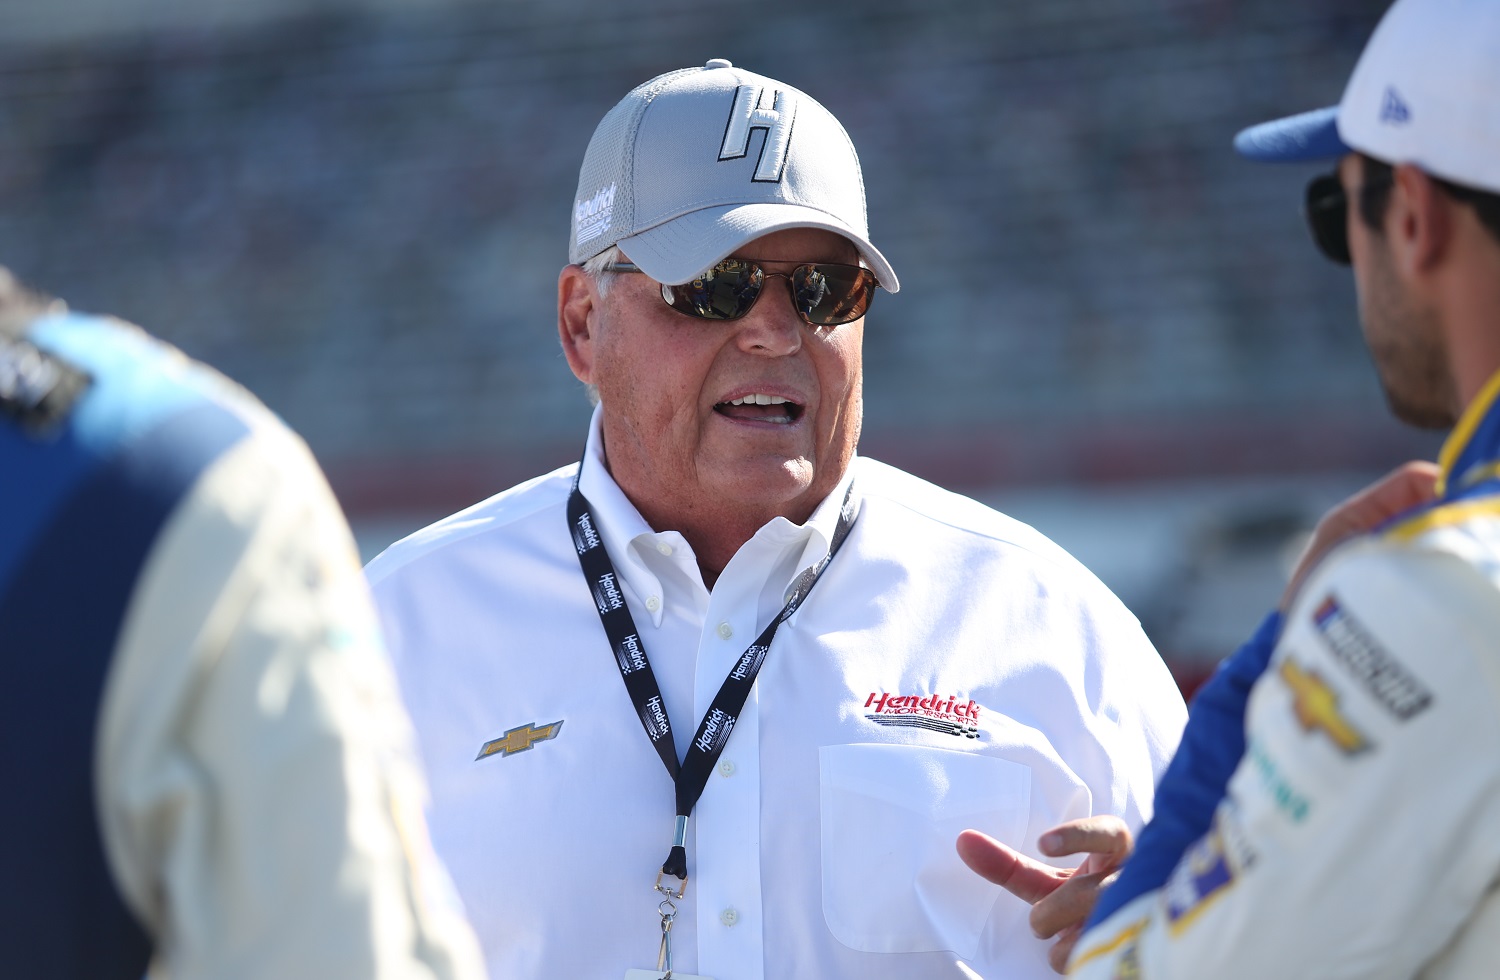 Rick Hendrick has been operating his NASCAR Cup Series team since 1984. Twenty drivers have won races in Hendrick Motorsports cars. | David Rosenblum/Icon Sportswire via Getty Images